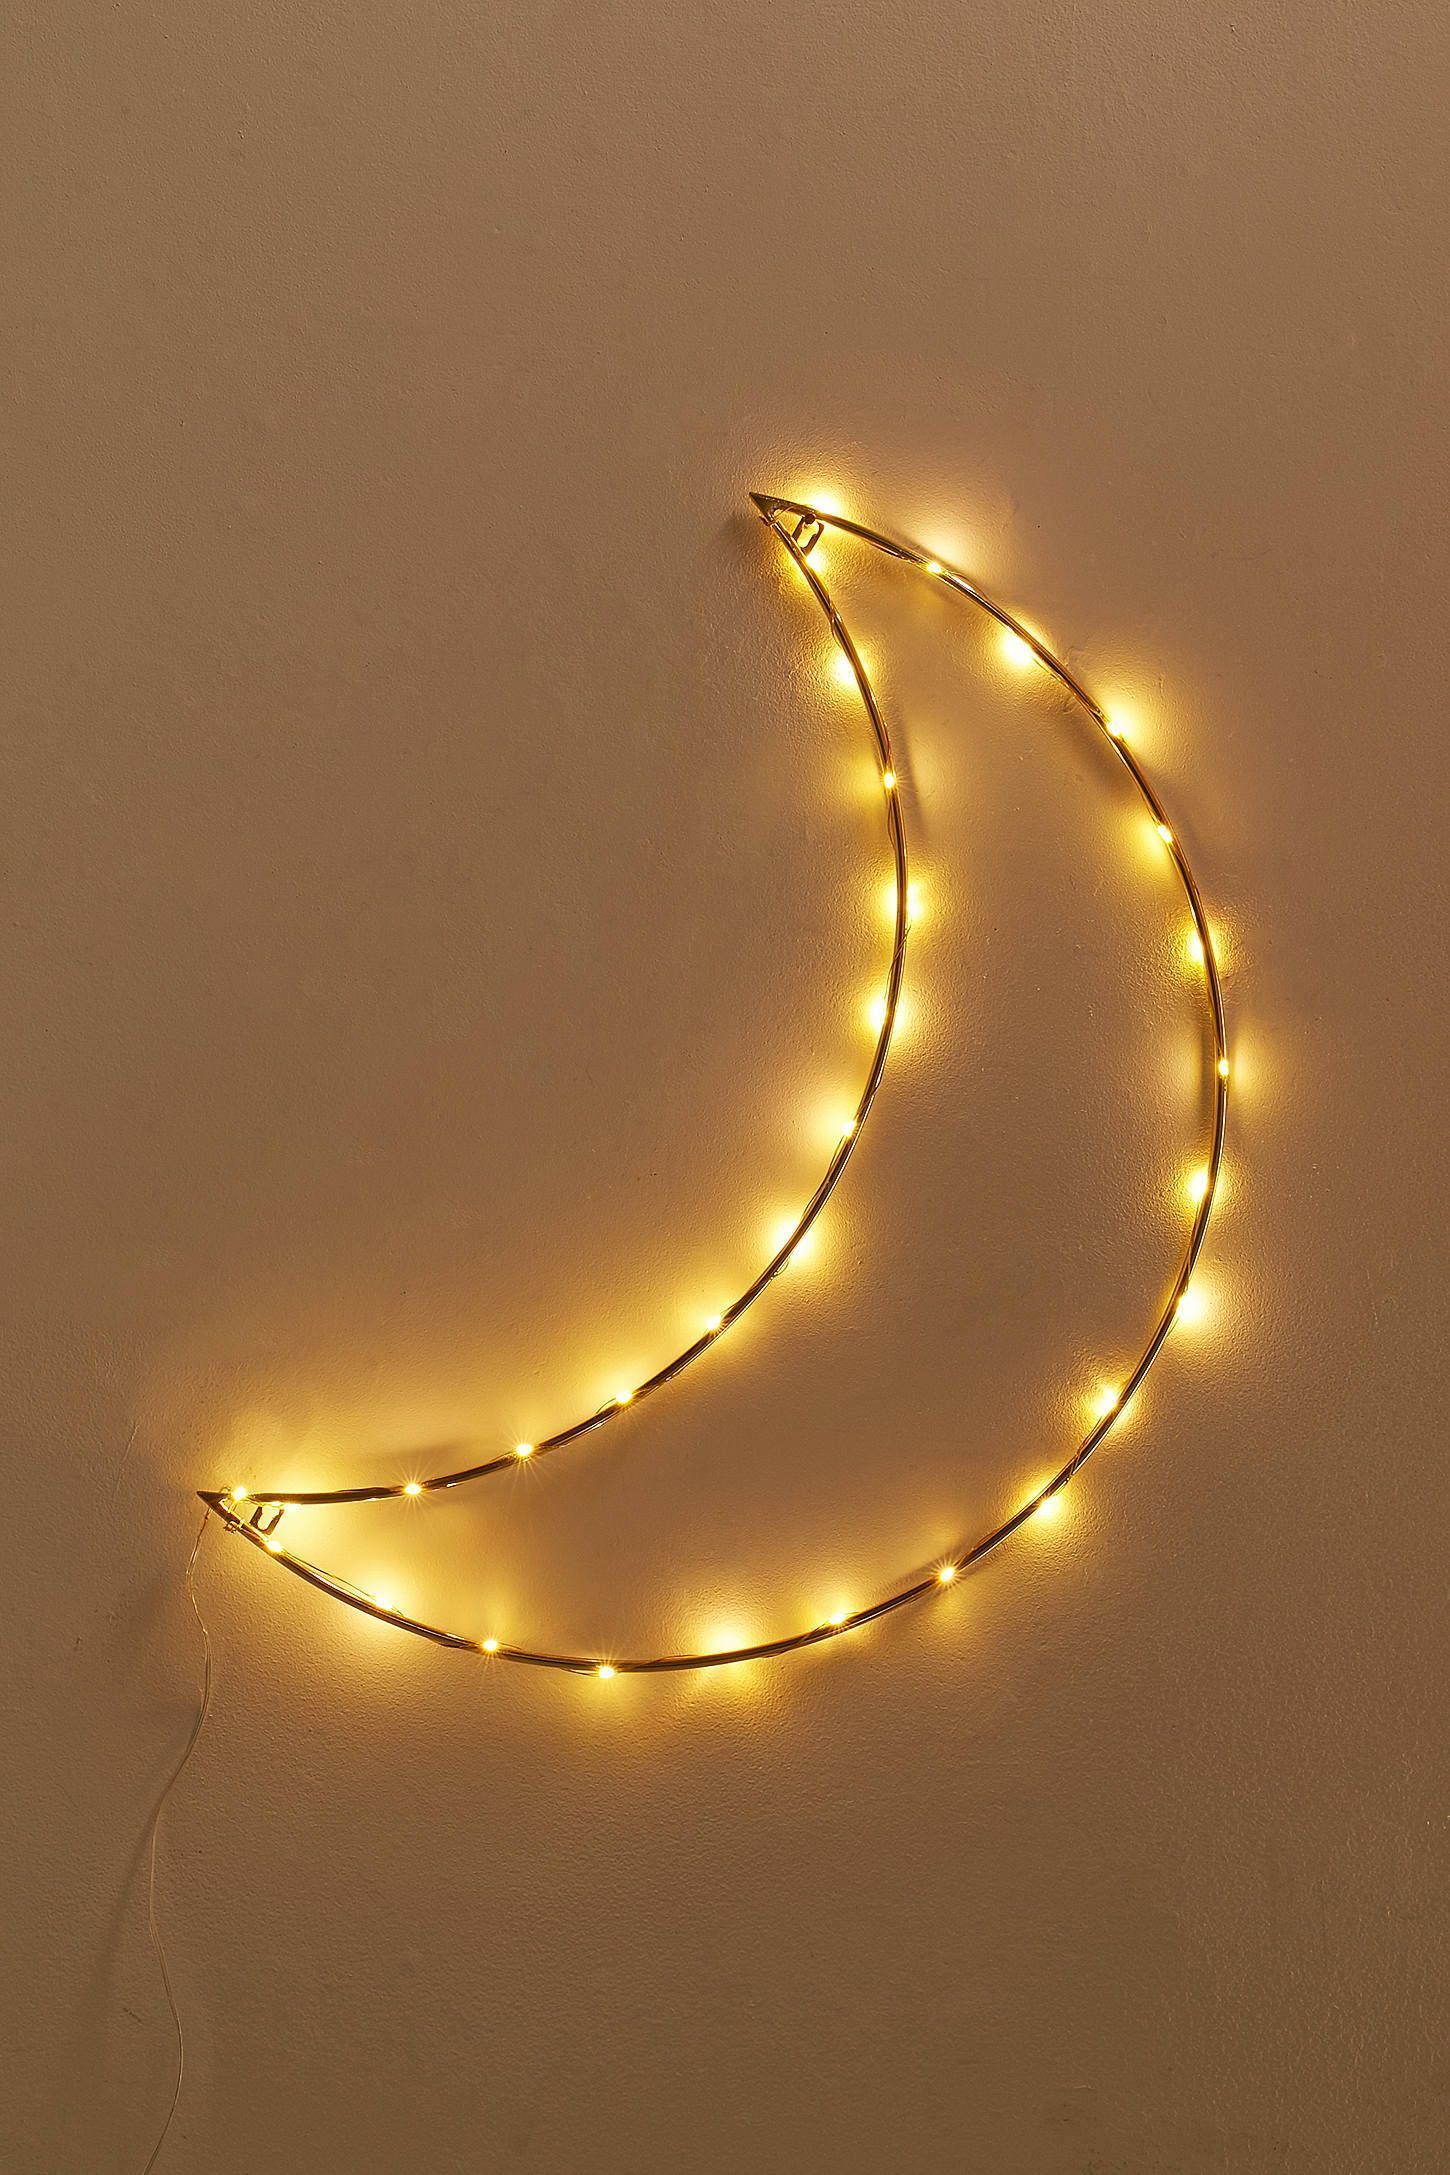 A moon-shaped string of lights on a wall. - Light yellow